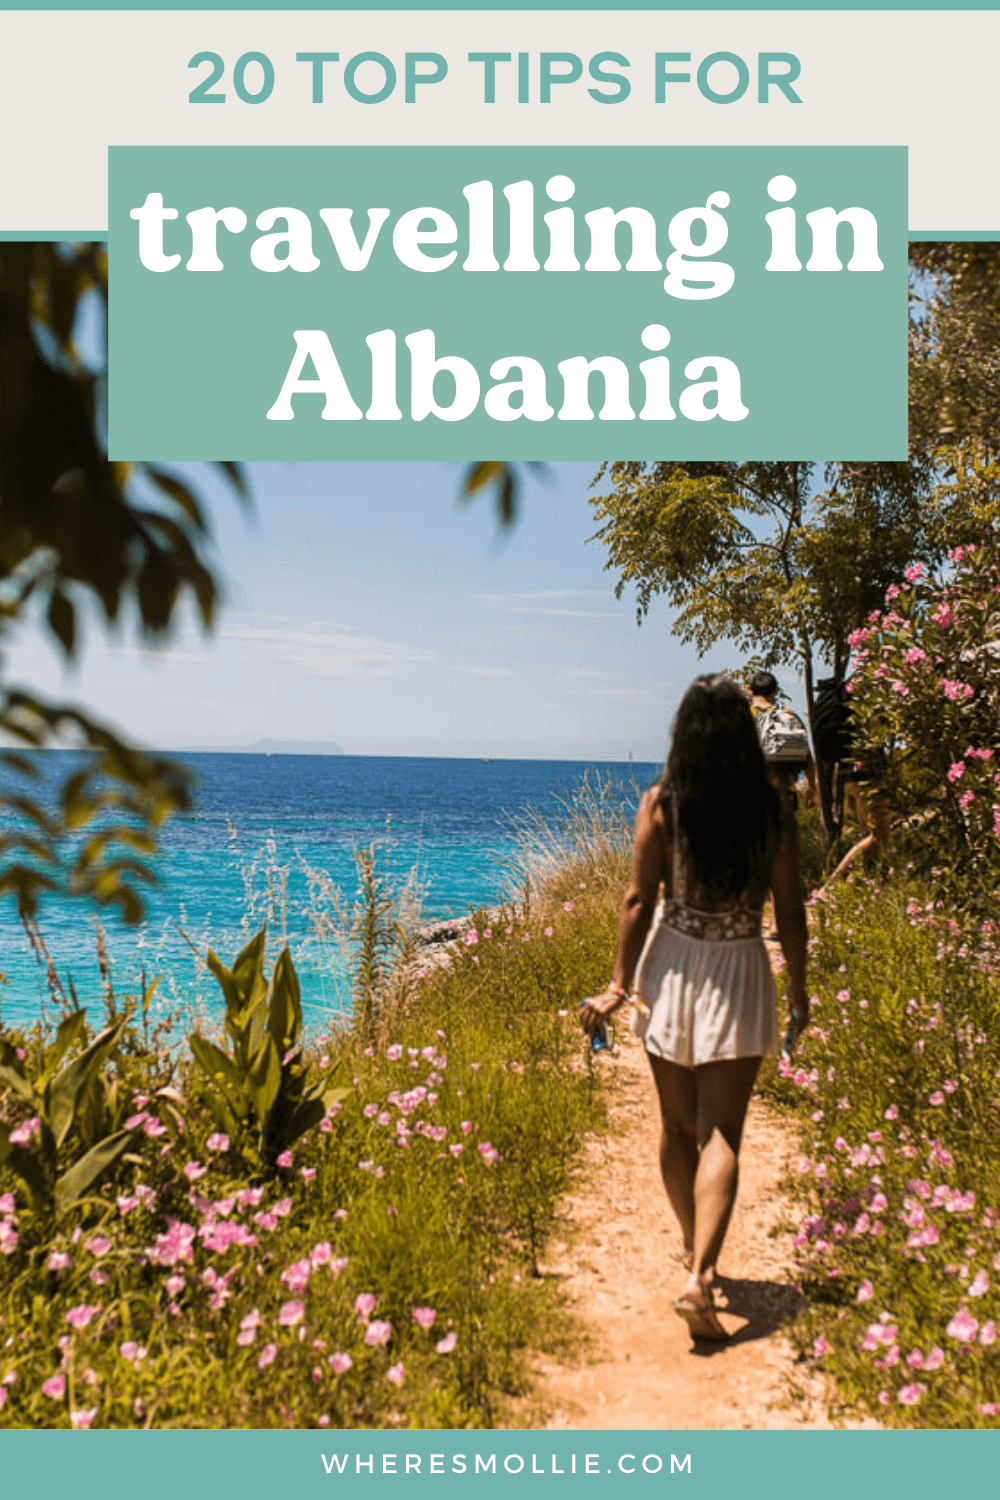 Travelling in Albania: Top tips, ATM fees and sim cards